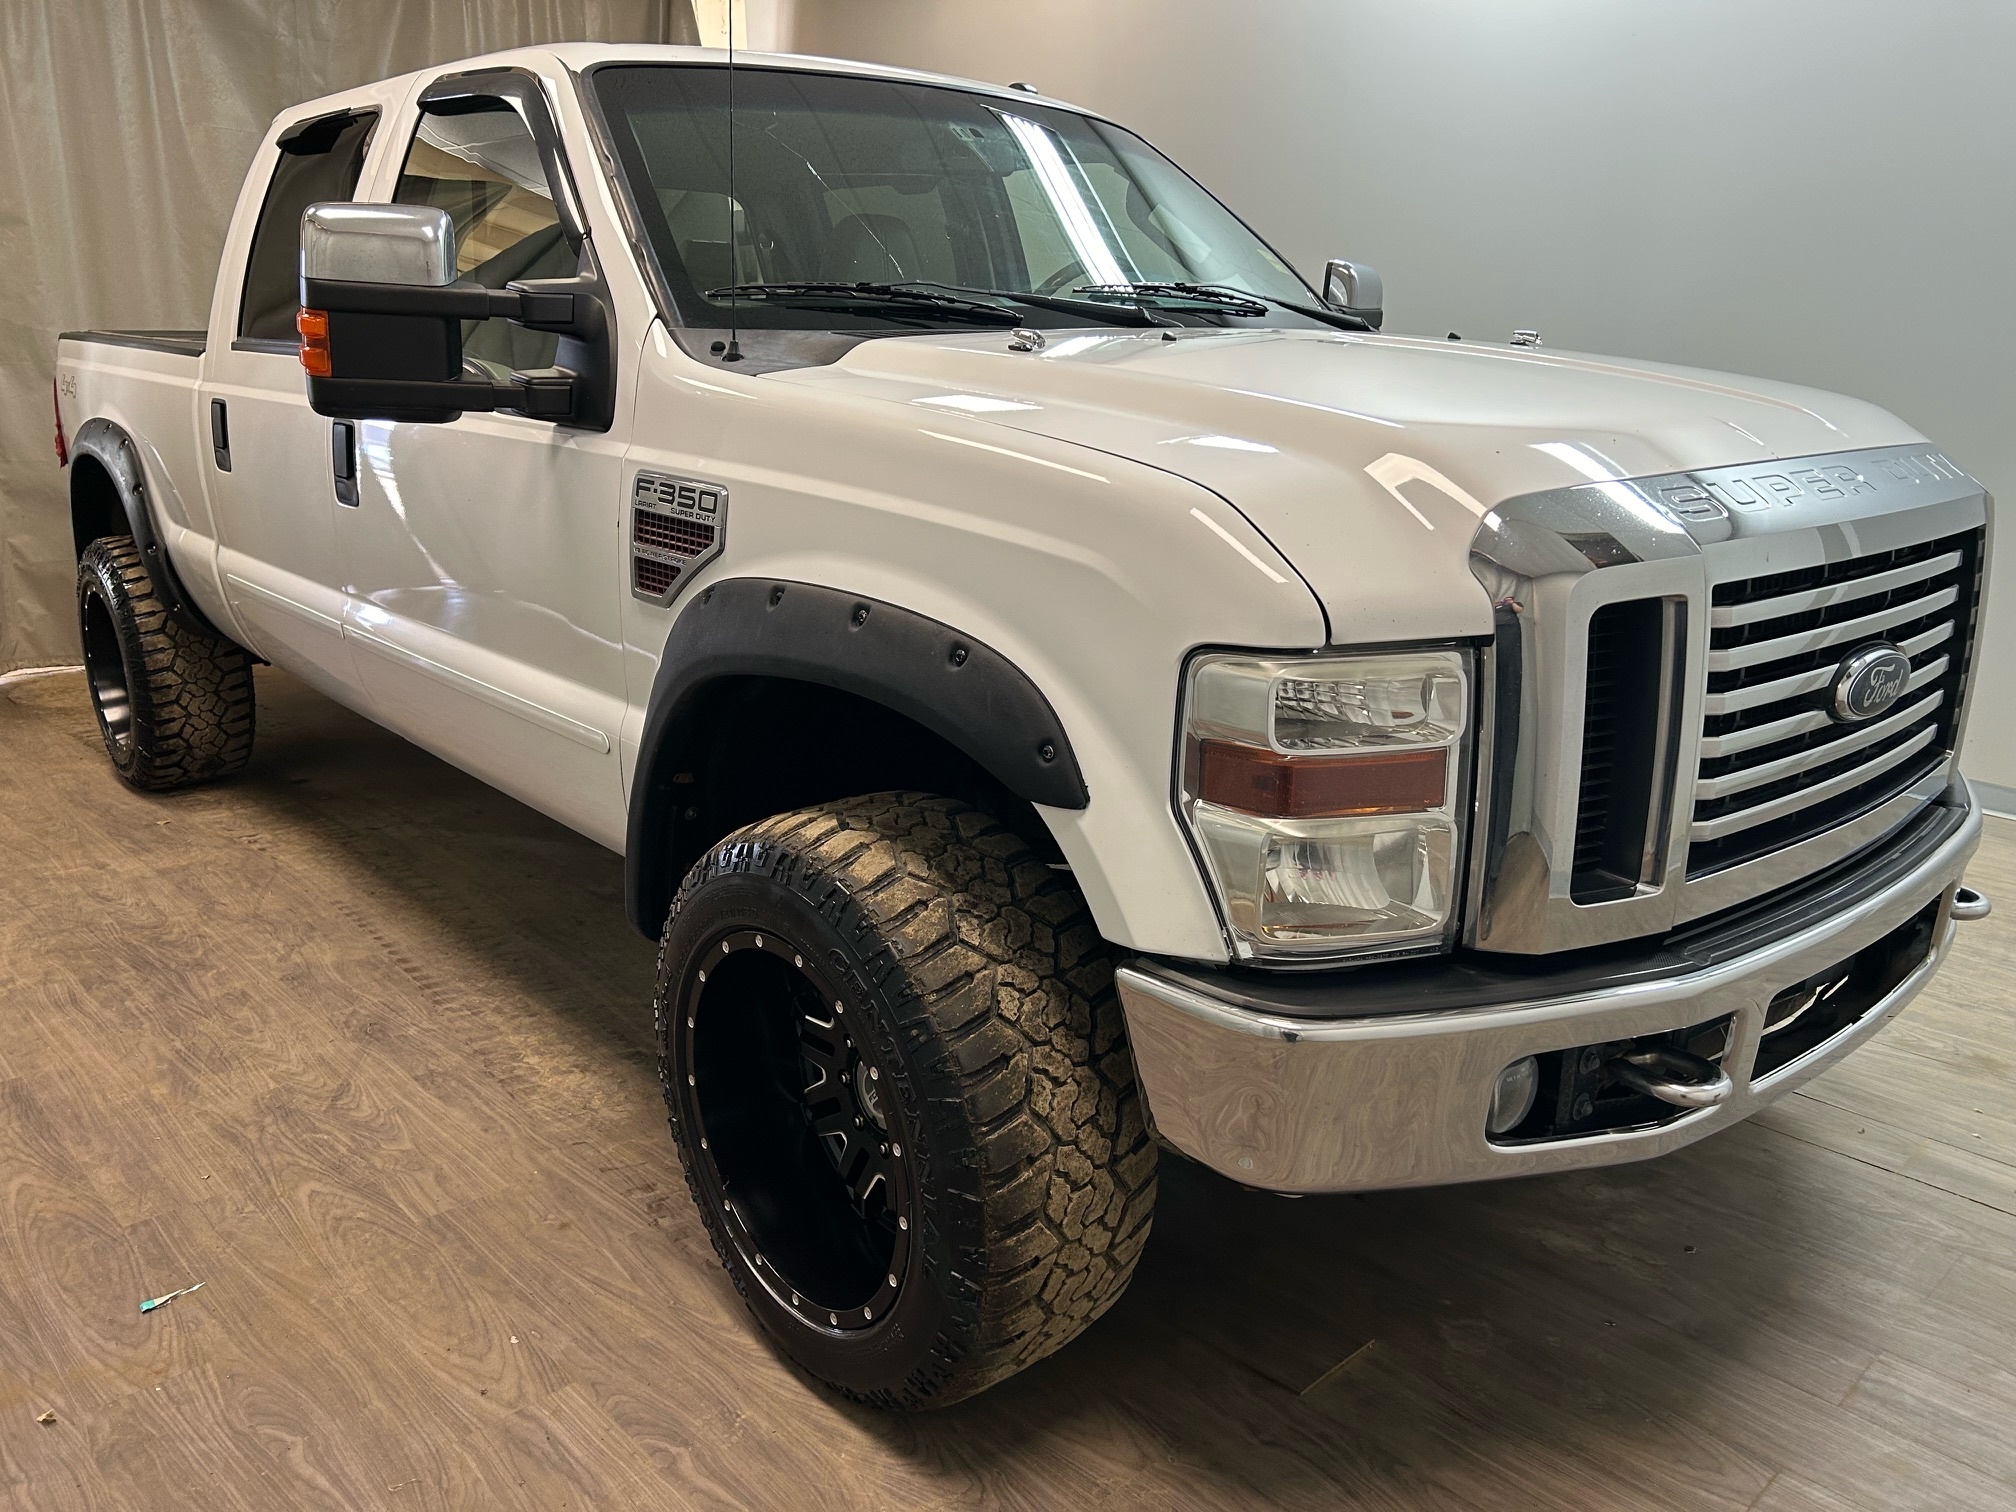 2009 Ford F-350 SUPER DUTY LARIAT POWERSTROKE DIESEL | HEATED LEATHER SEATS